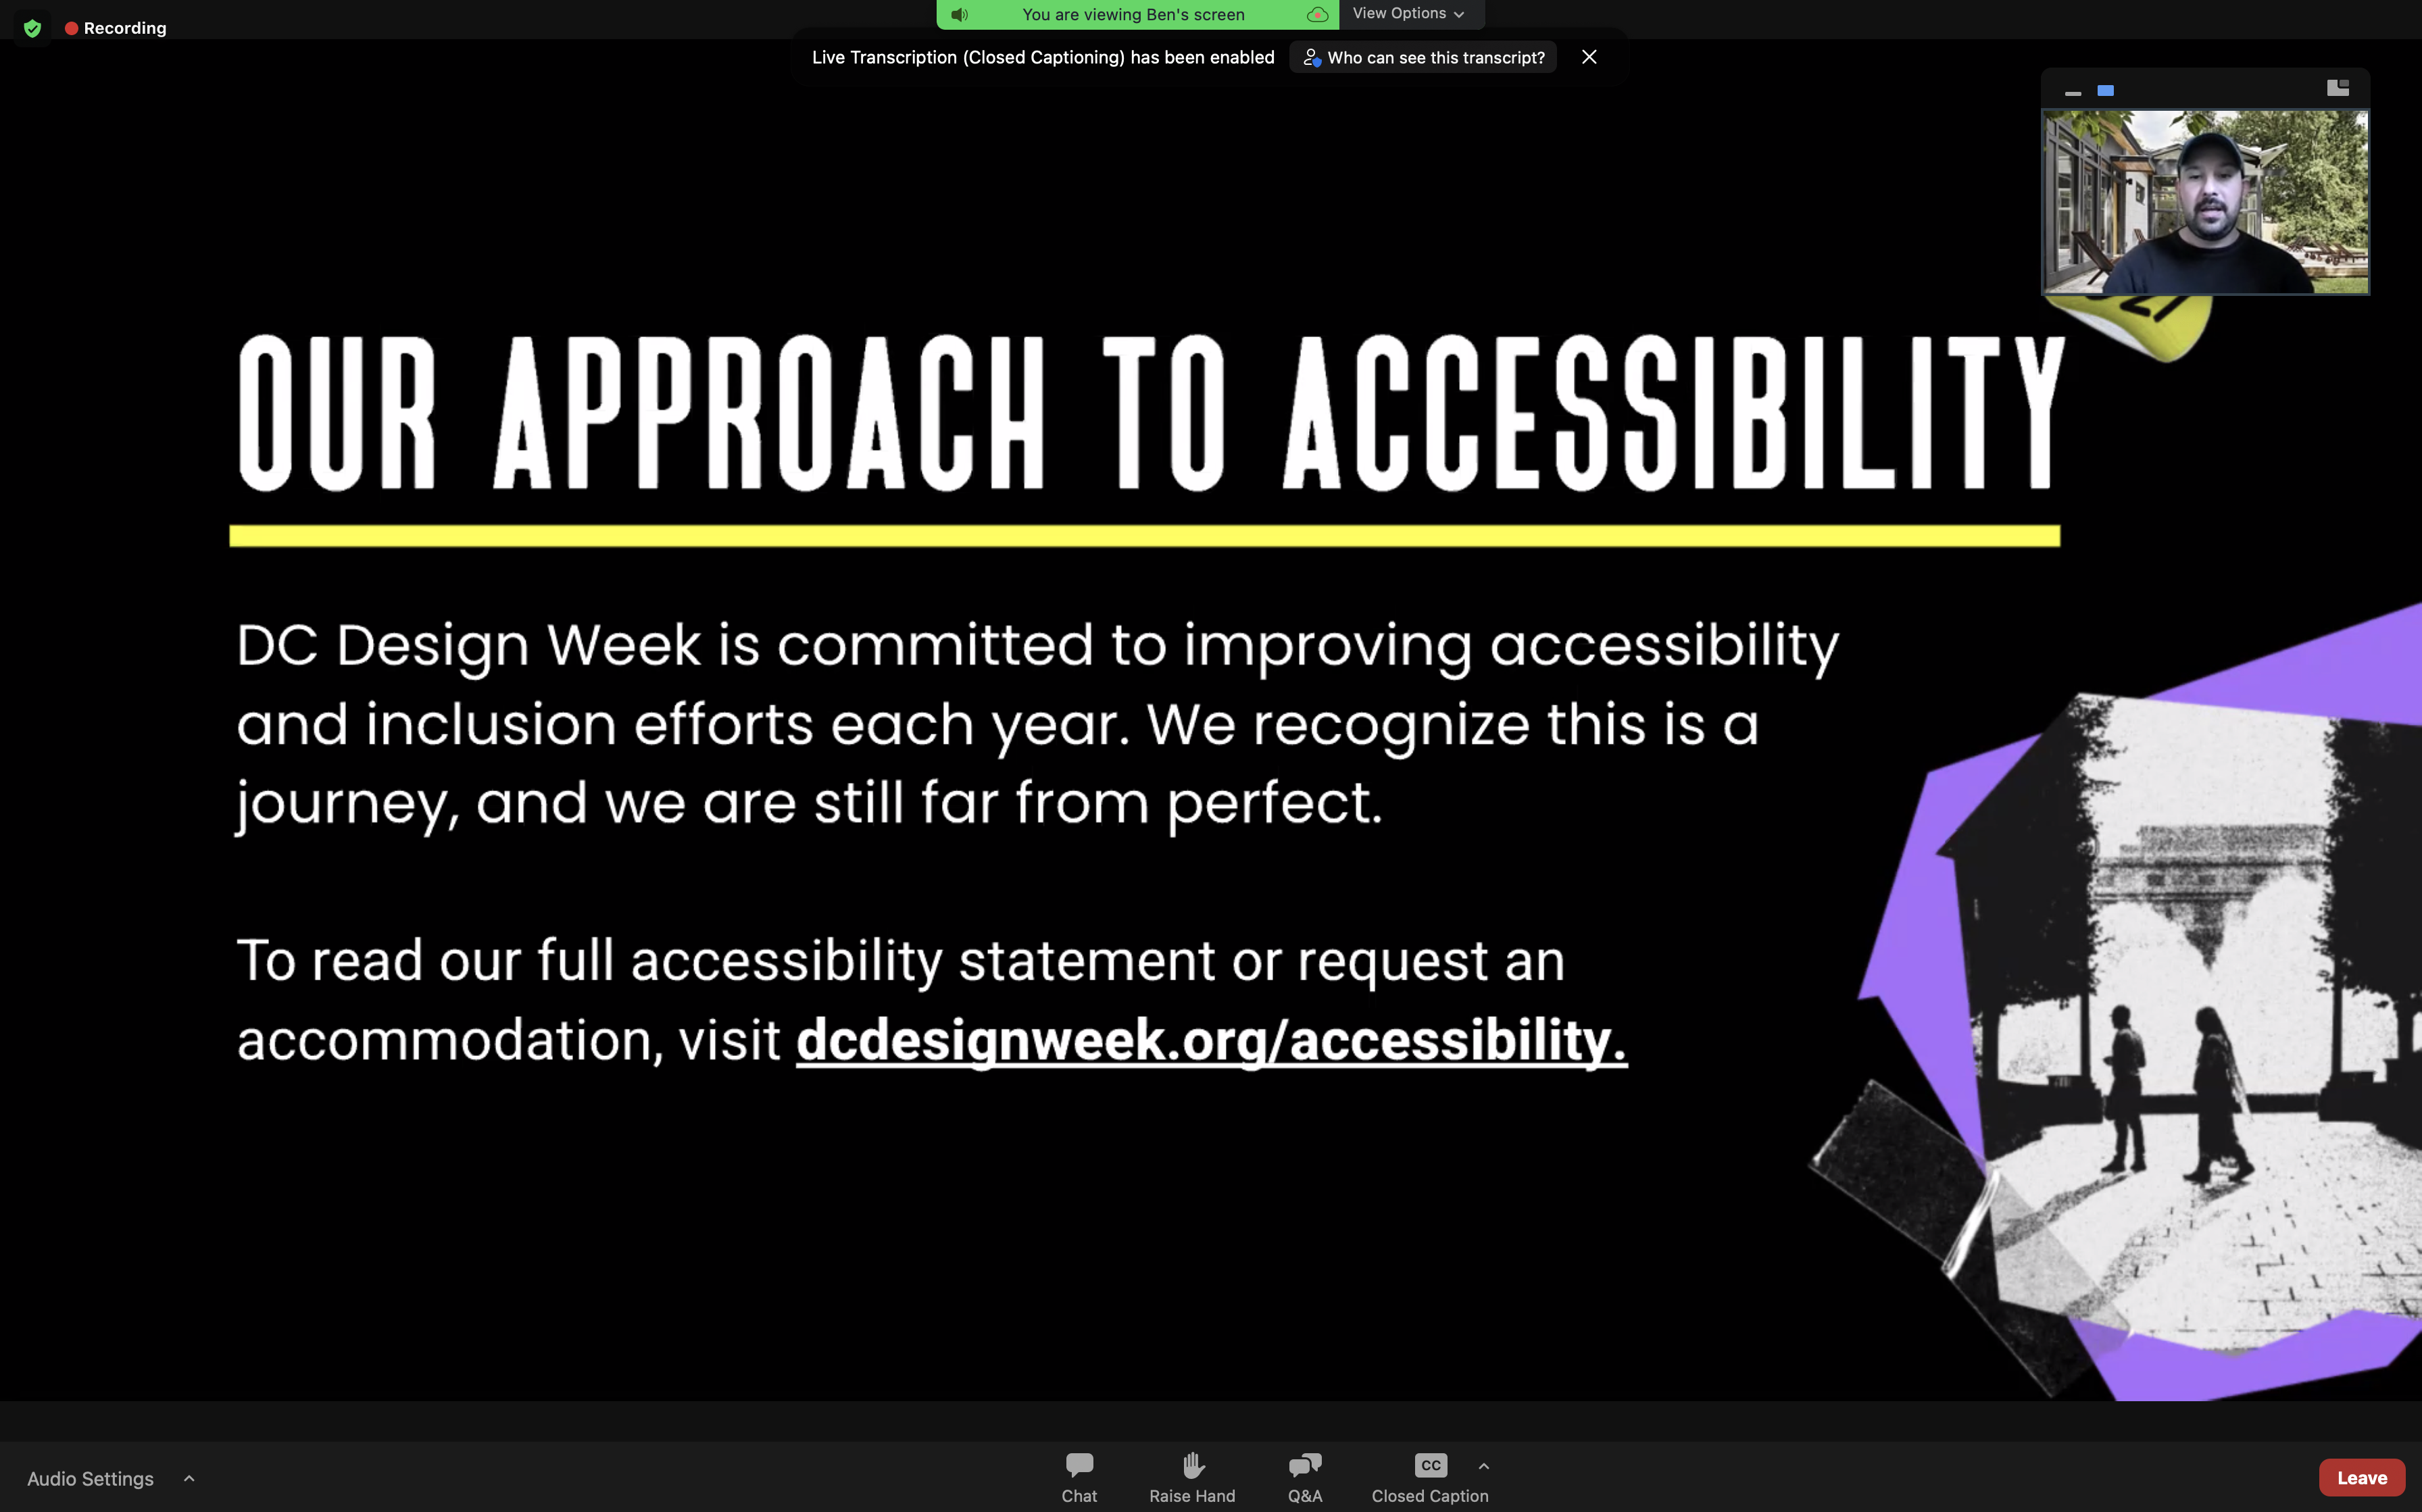 A presenter commenting on a slide detailing how to request for accommodations and learn more about accessibility at DCDW.